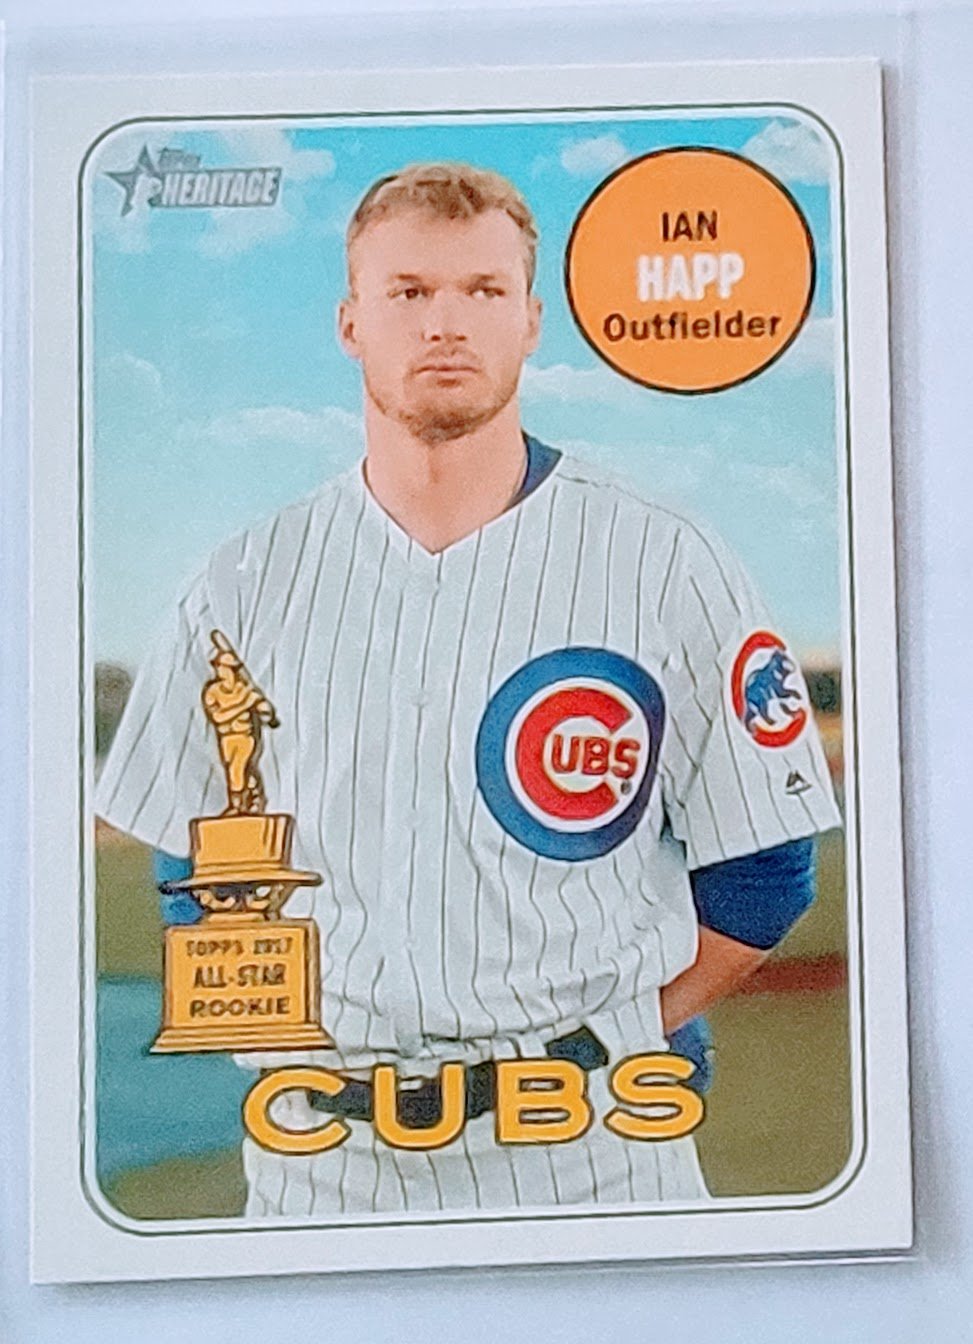 2018 Topps Heritage Ian Happ All Star Rookie Baseball Card TPTV simple Xclusive Collectibles   